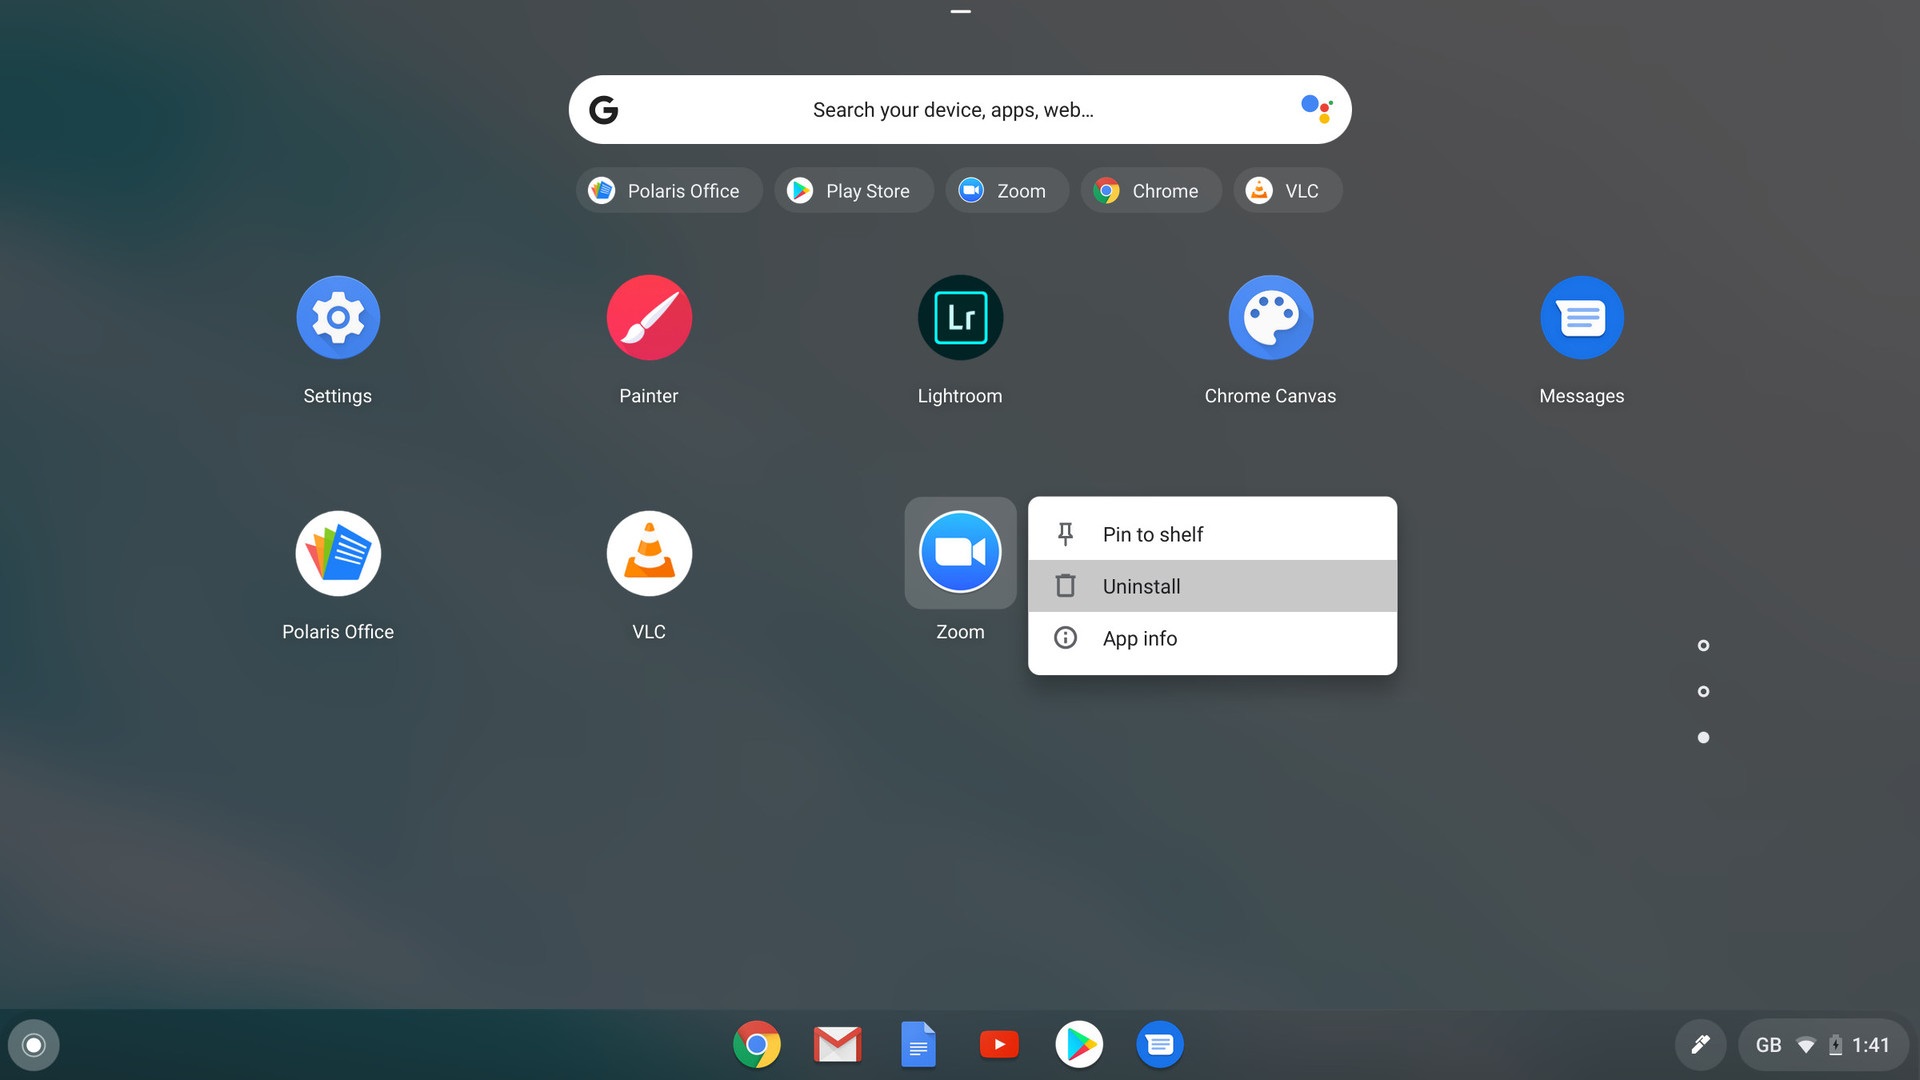 Uninstalling apps: Easily remove unwanted apps from your Chromebook to free up storage space
Managing storage: Monitor and manage your app storage to optimize performance and prevent any storage issues